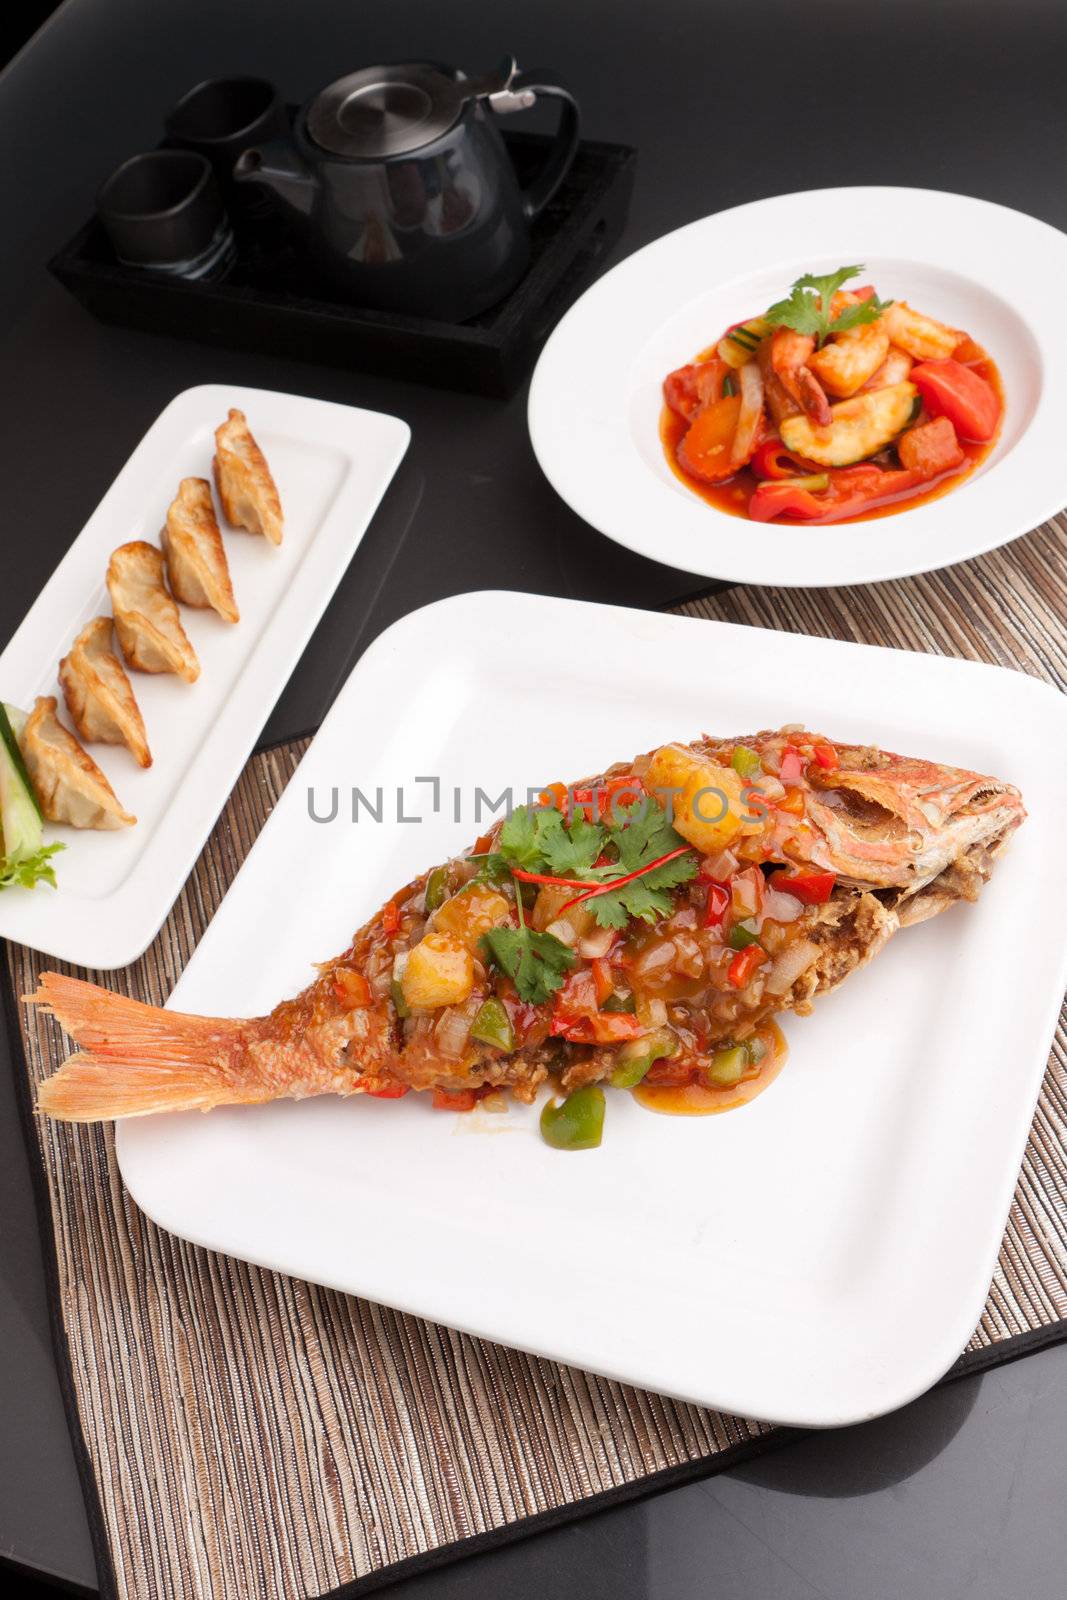 Freshly prepared Thai style whole fish red snapper dinner with sweet and sour shrimp and pan fried gyoza dumplings appetizer.  